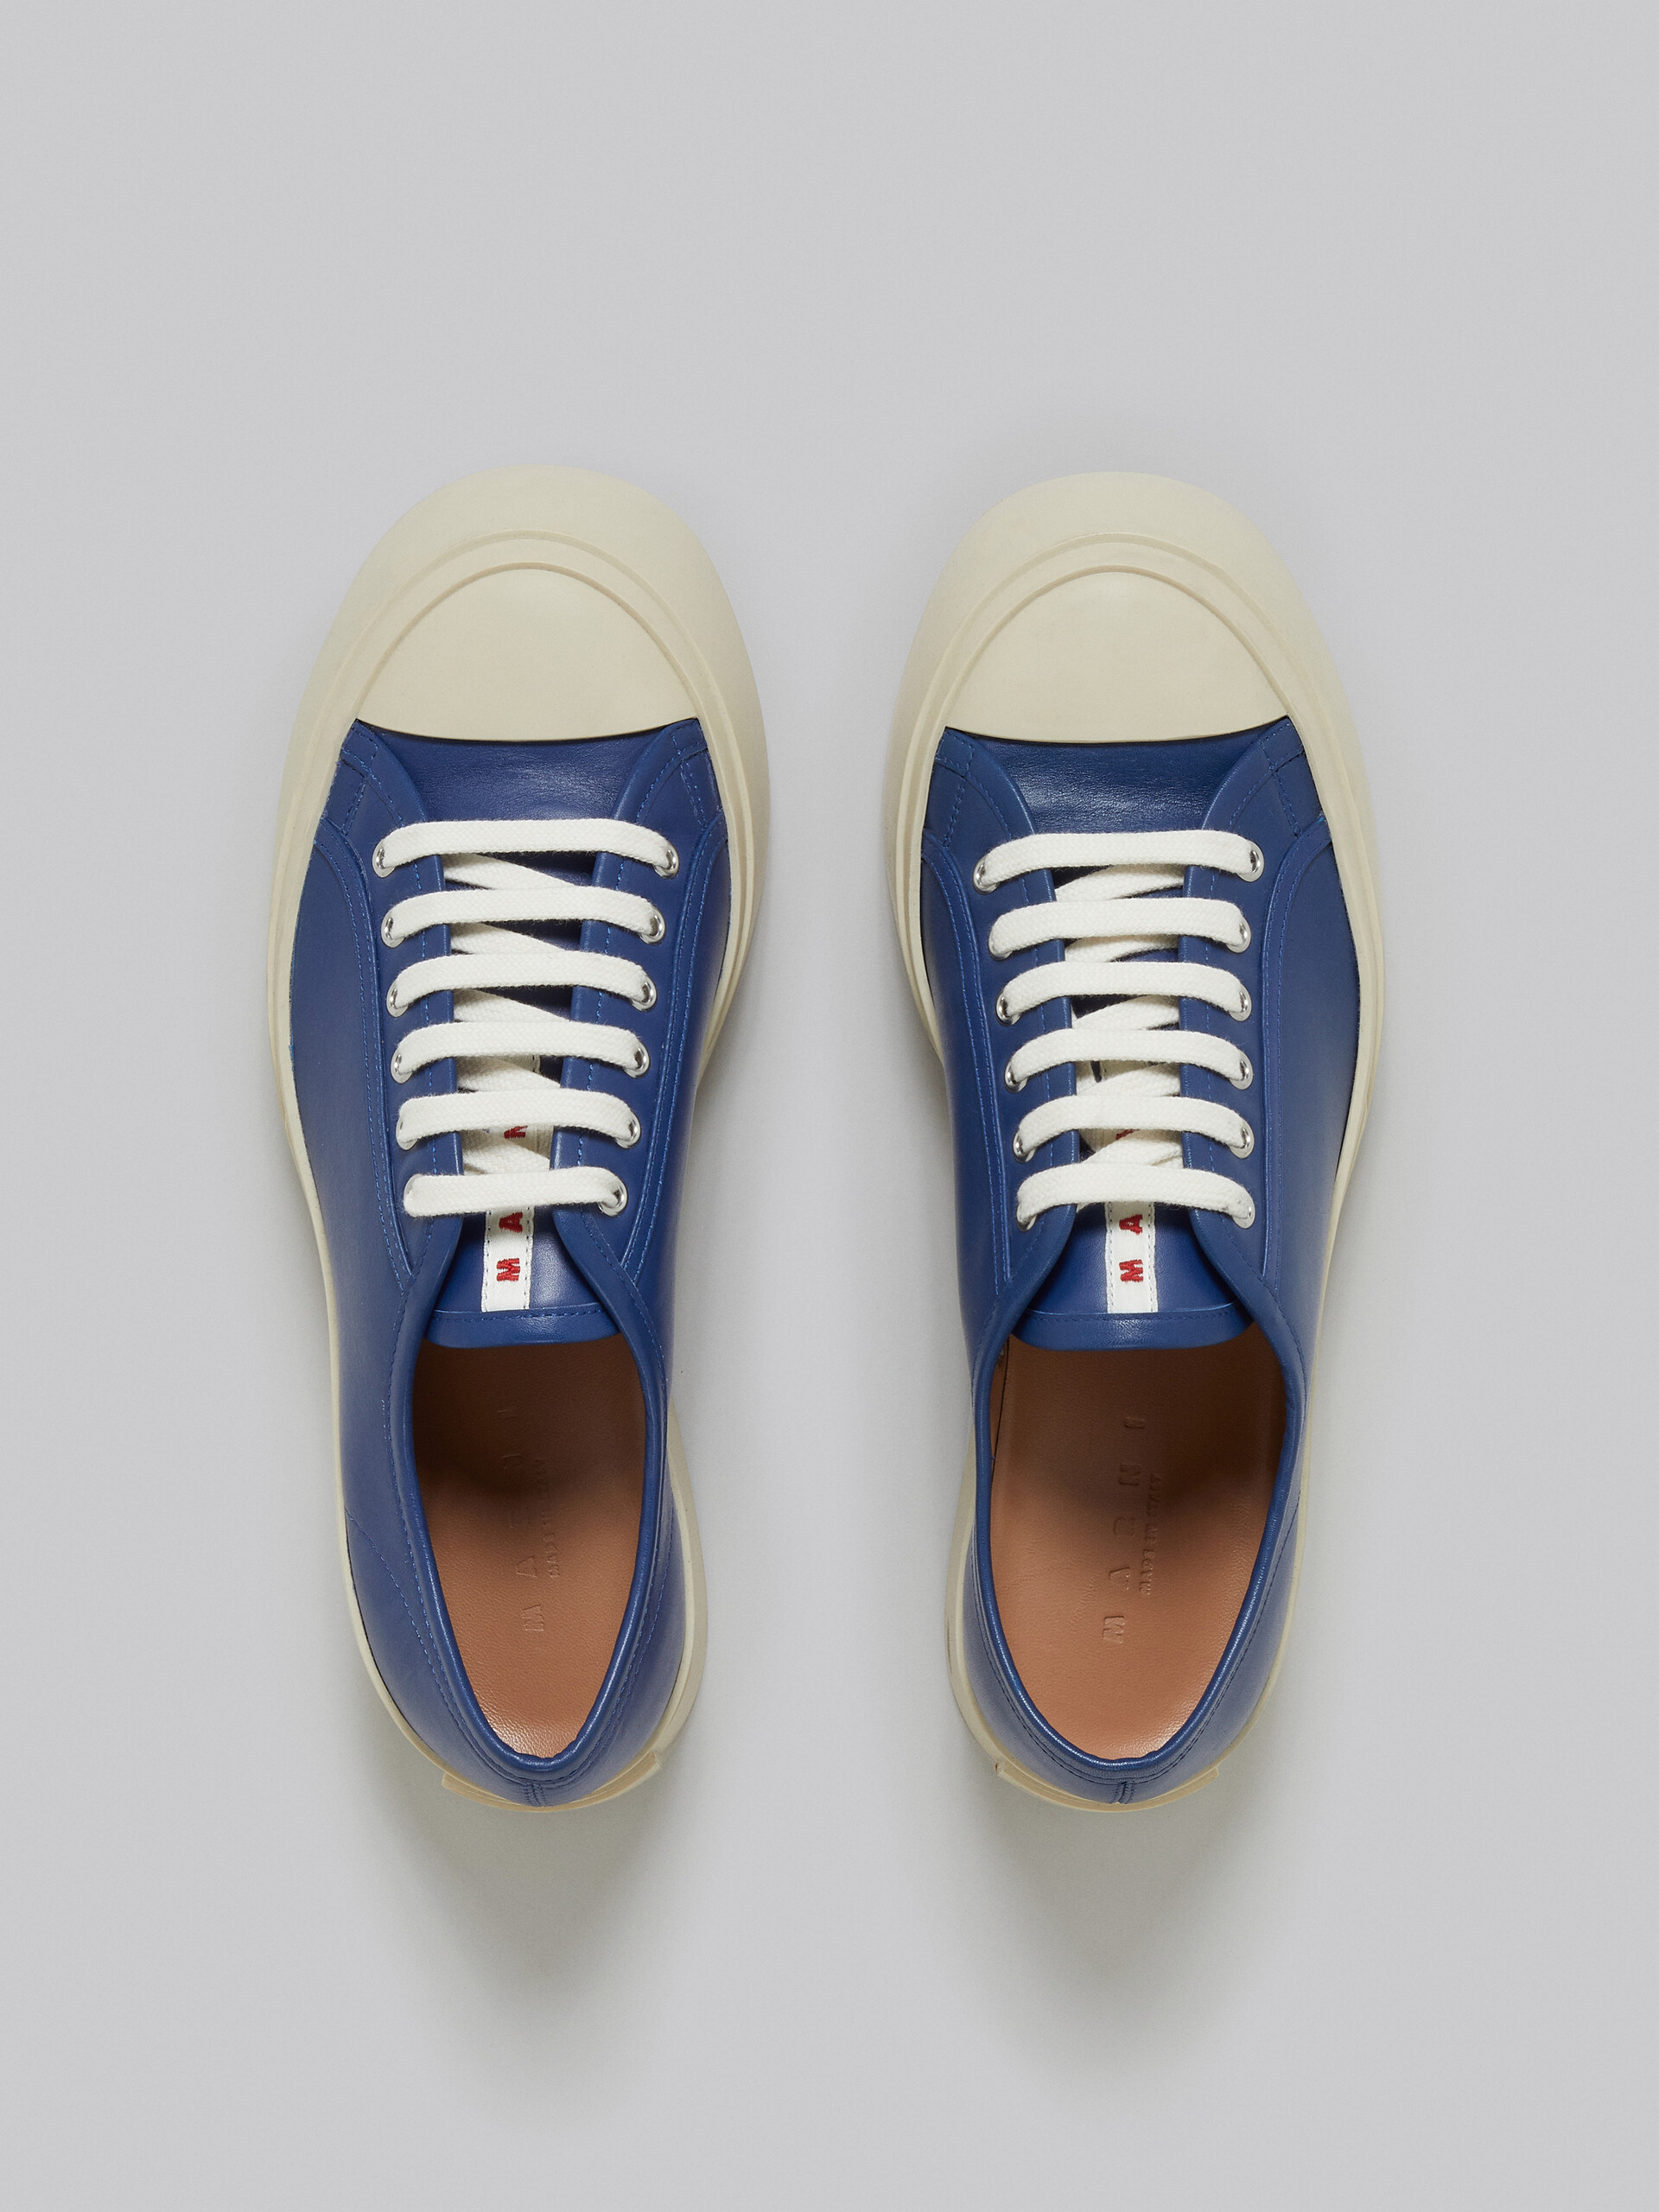 Blue nappa leather Pablo sneaker - Sneakers - Image 4